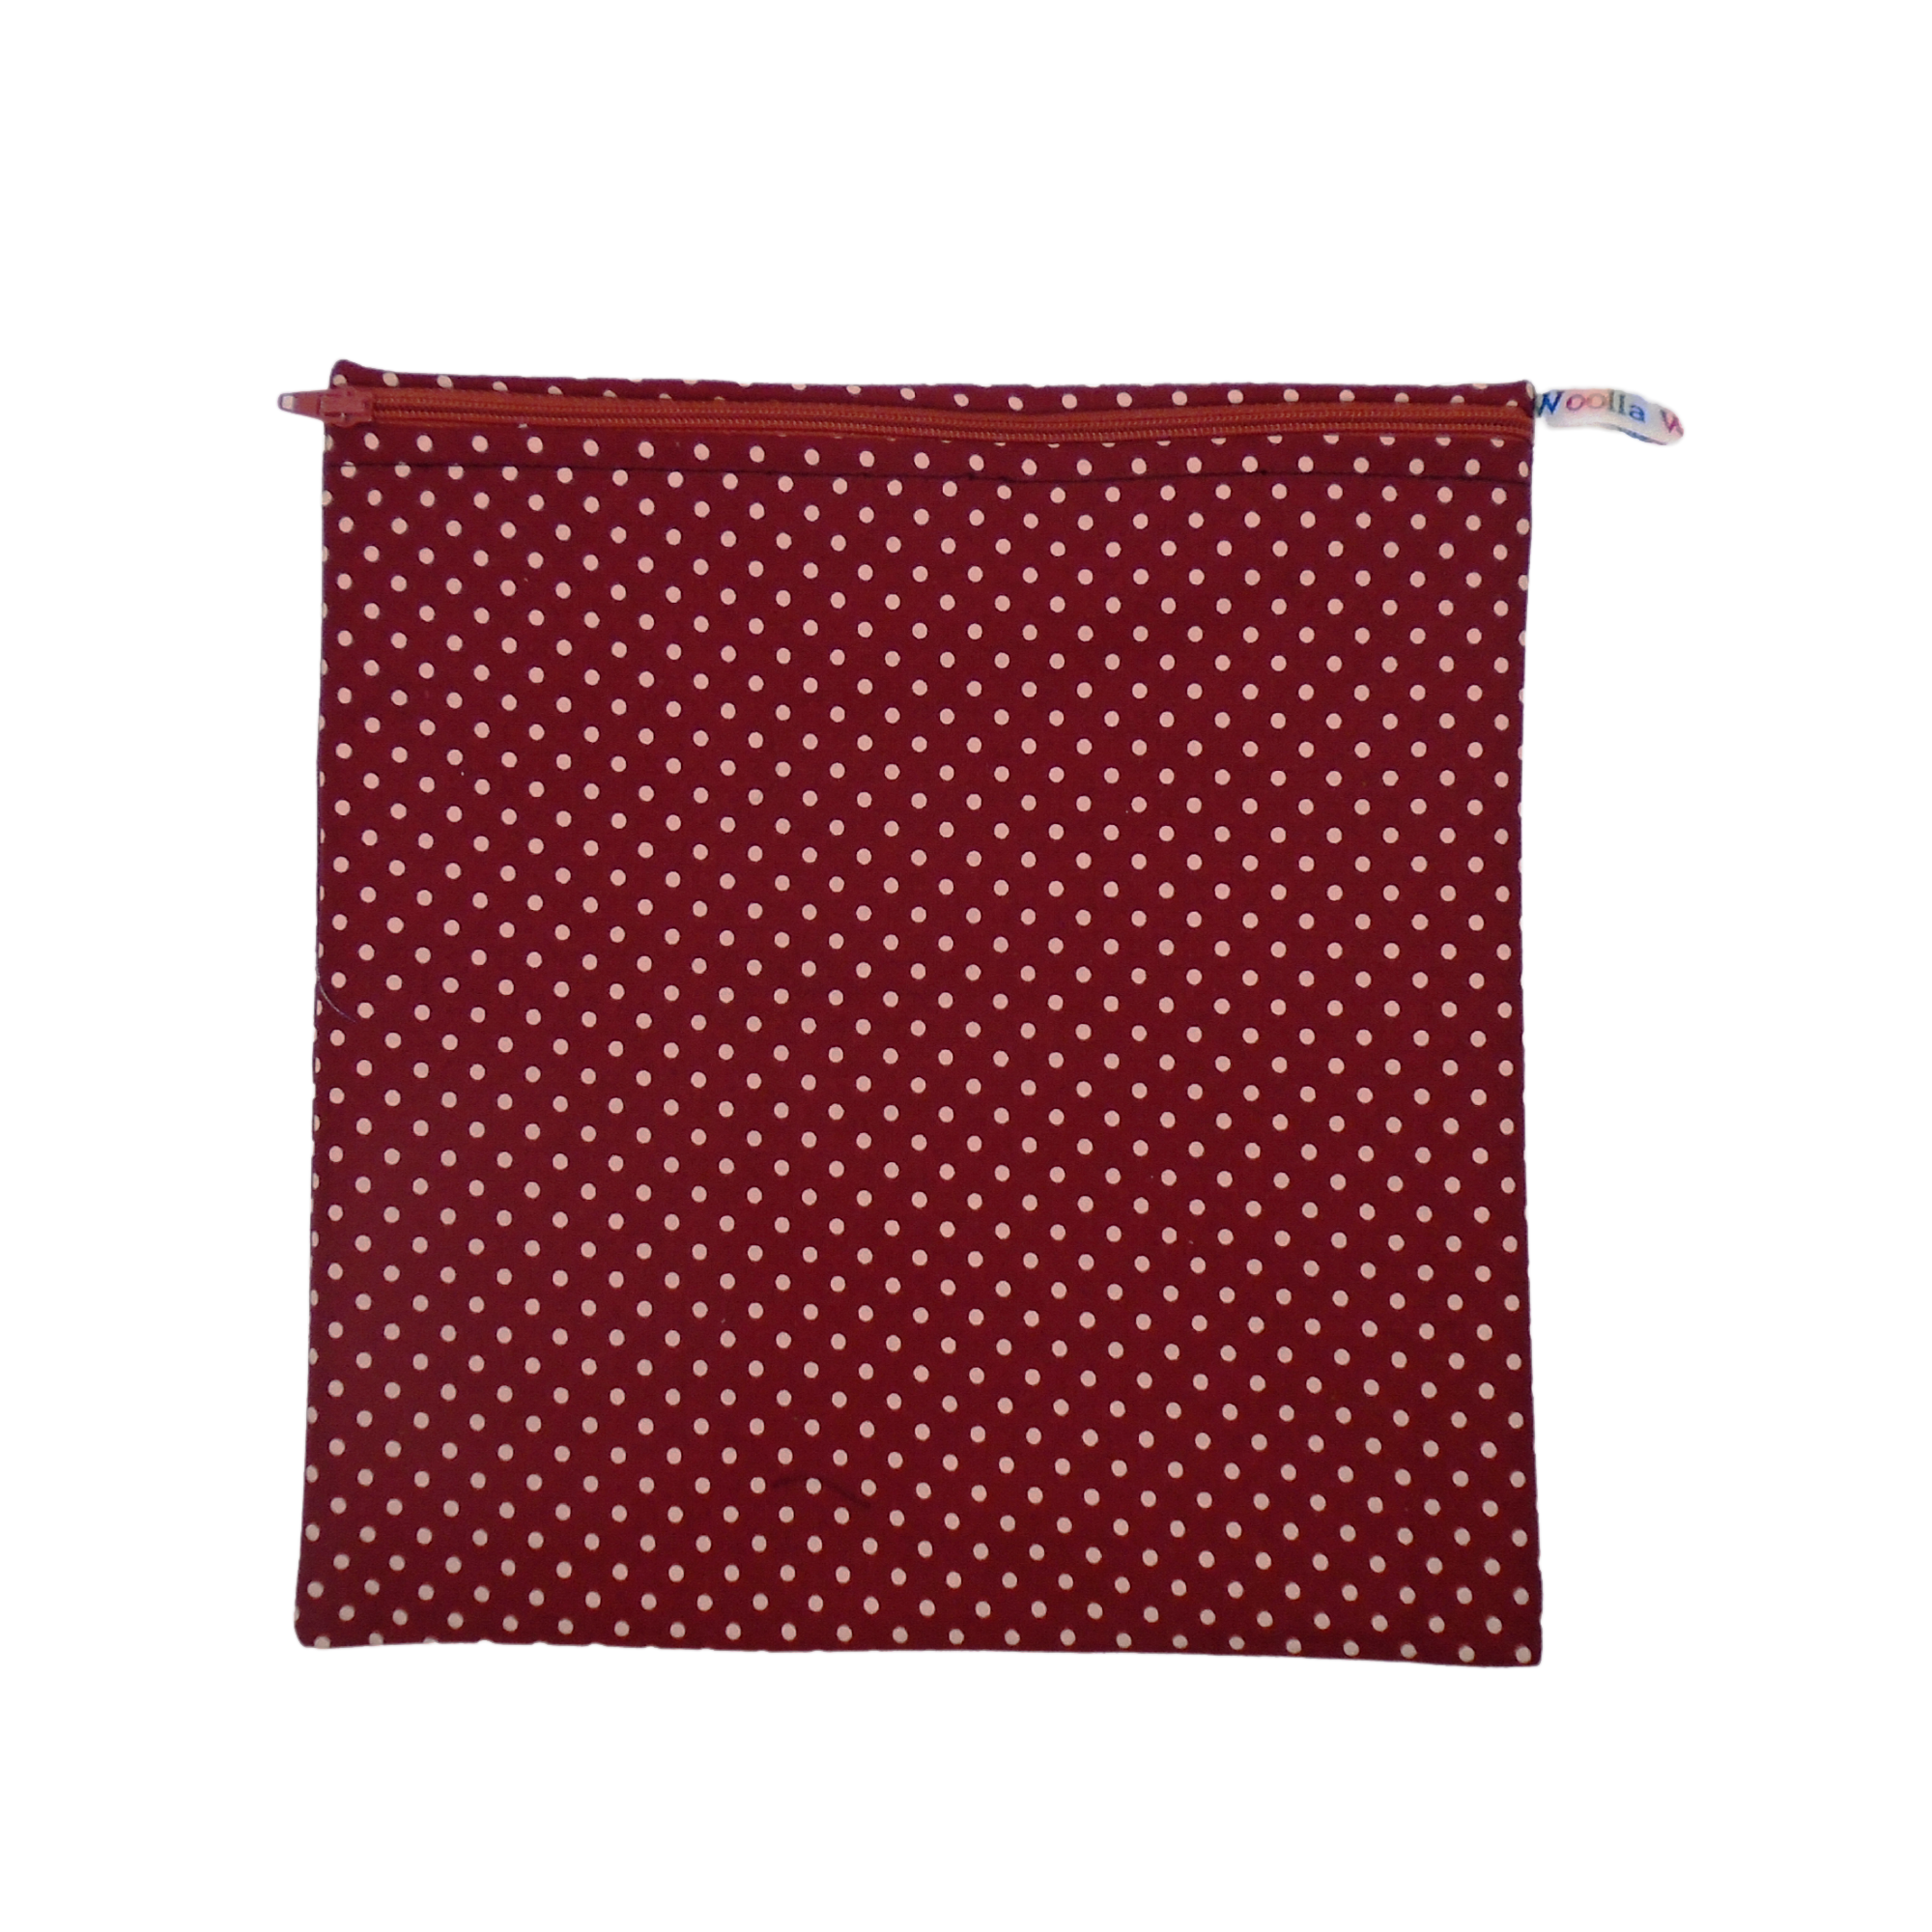 Autumn Polka - Large Poppins Pouch - Waterproof, Washable, Food Safe, Vegan, Lined Zip Bag